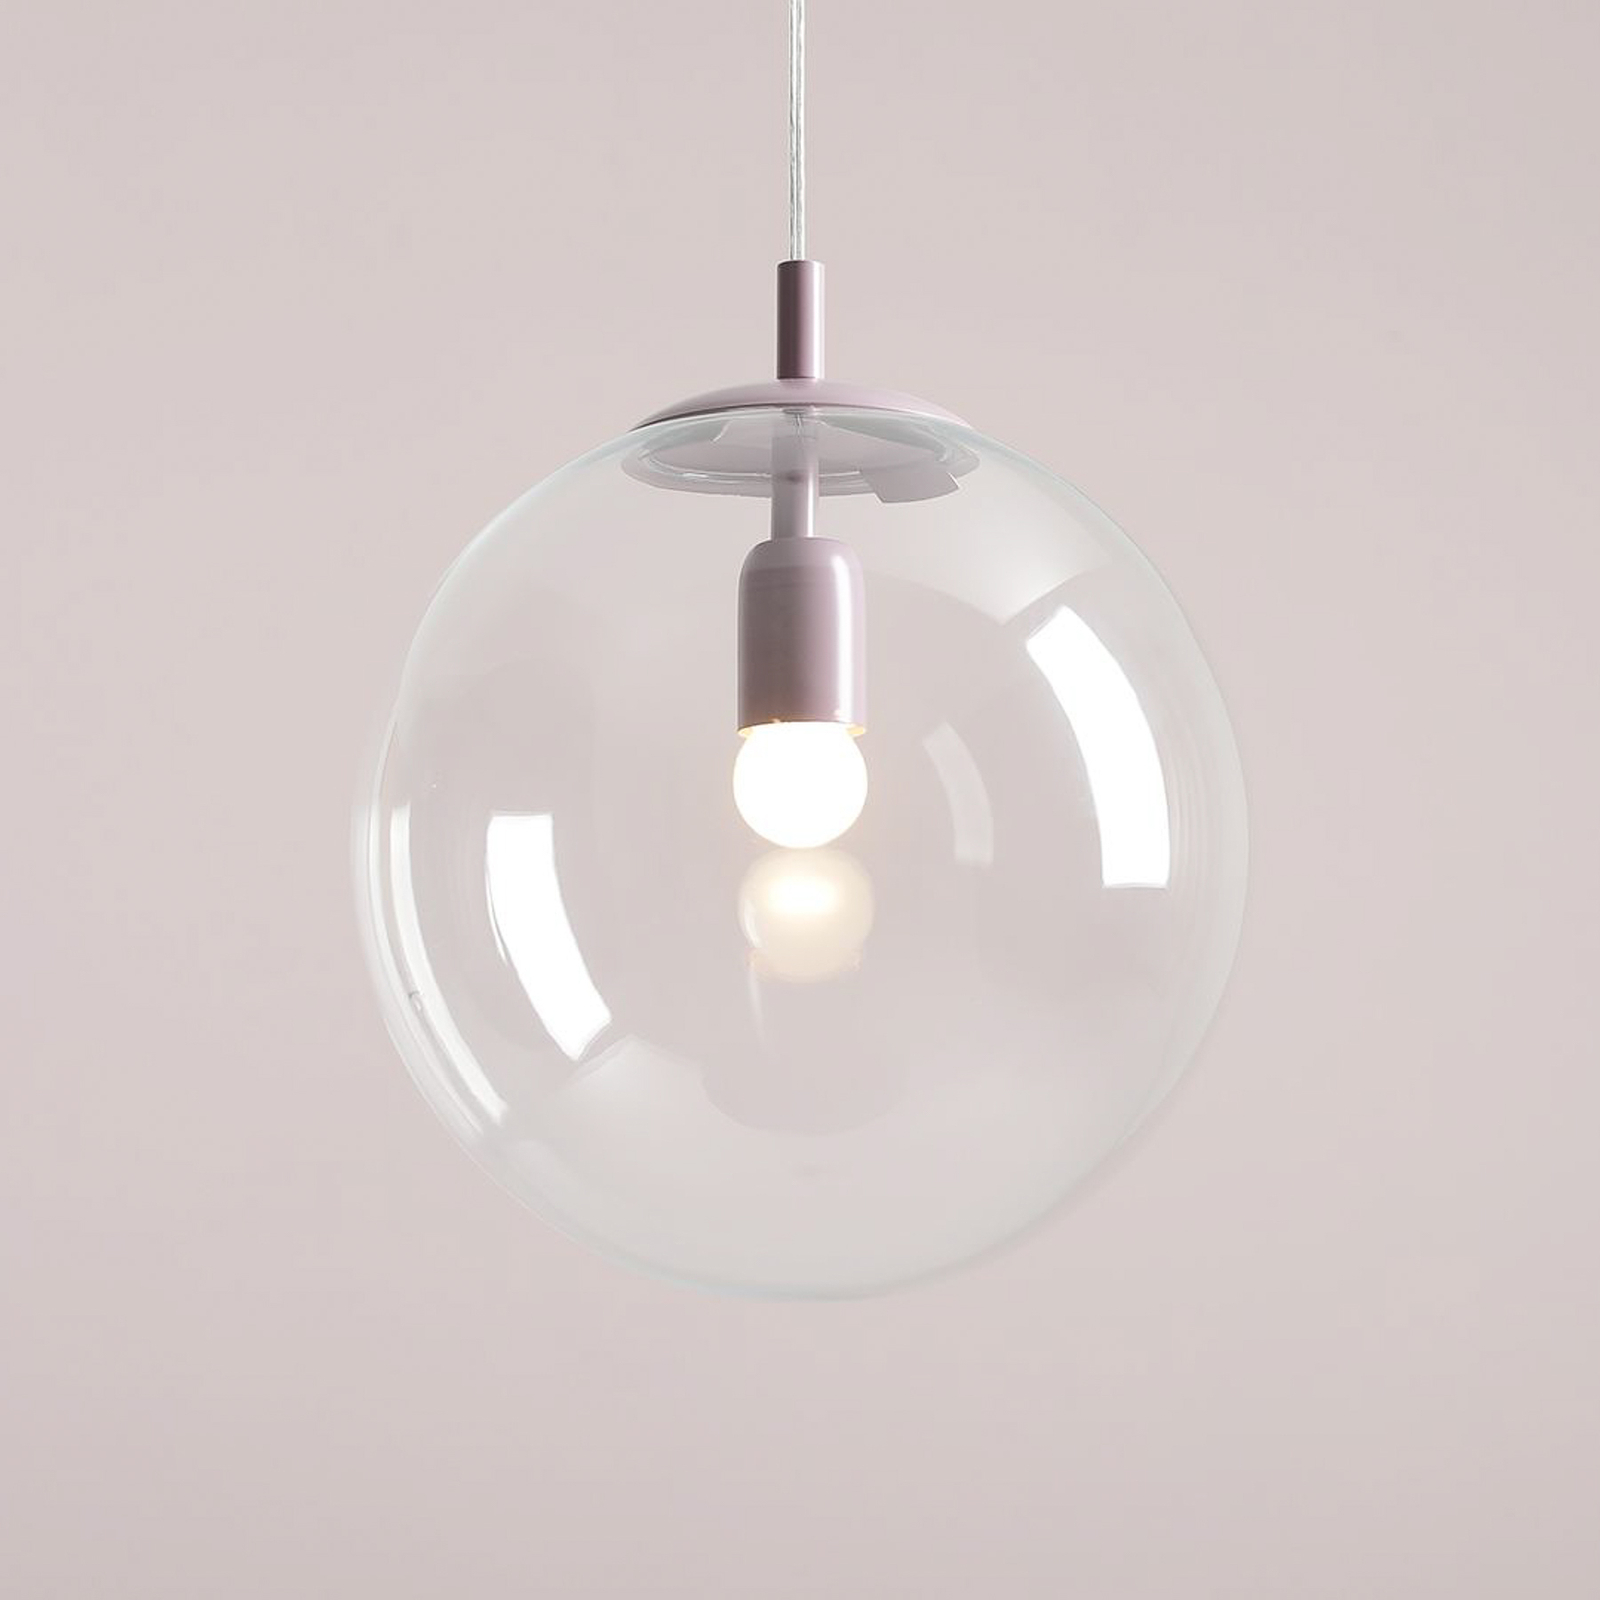 Nohr pendant light, glass lampshade, lilac/clear